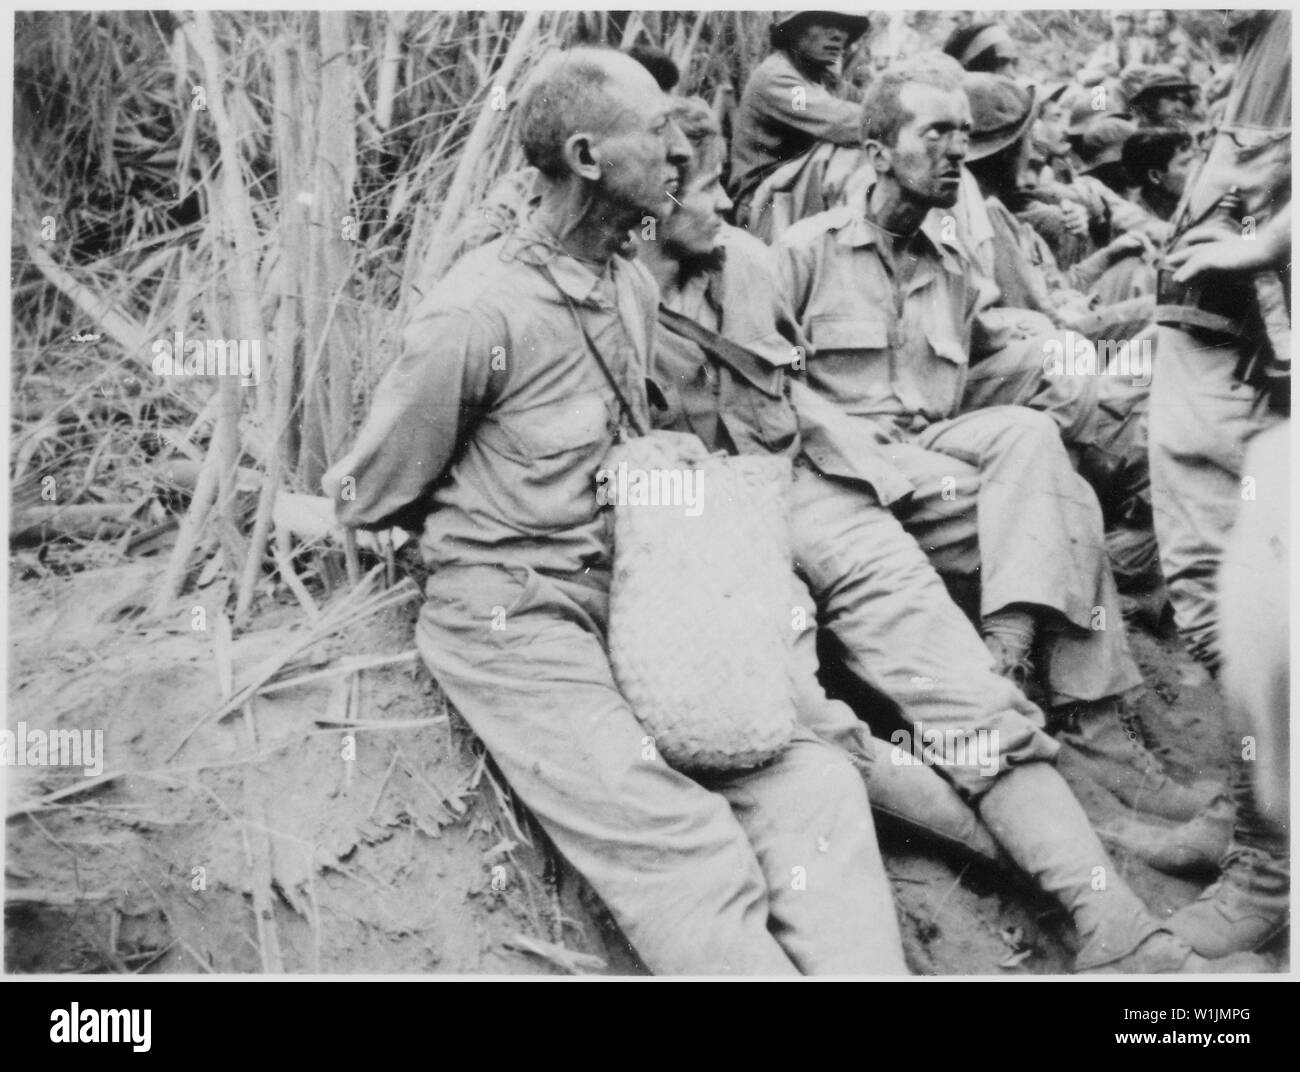 The March of Death. Along the March [on which] these prisoners were photographed, they have their hands tied behind their backs. The March of Death was about May 1942, from Bataan to Cabanatuan, the prison camp.; General notes:  Use War and Conflict Number 1144 when ordering a reproduction or requesting information about this image. Stock Photo